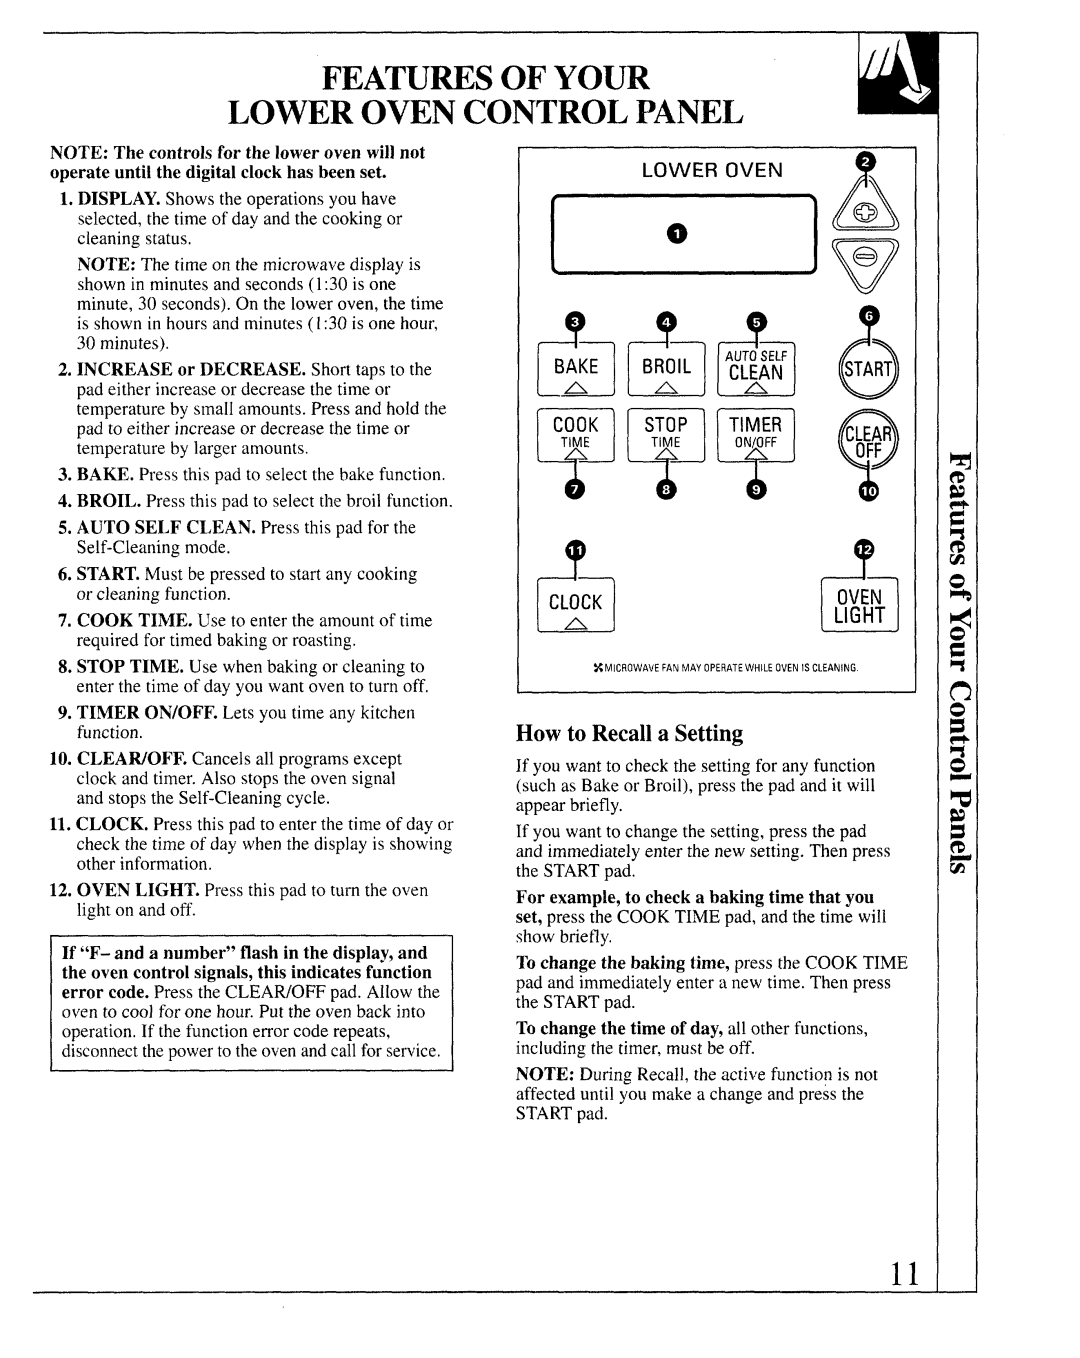 GE 164D2966P127-I, JKP66, JKP64, JKP65 manual Featuresof Your Lower Oven Control Panel, How to Recall a Setting, Light 